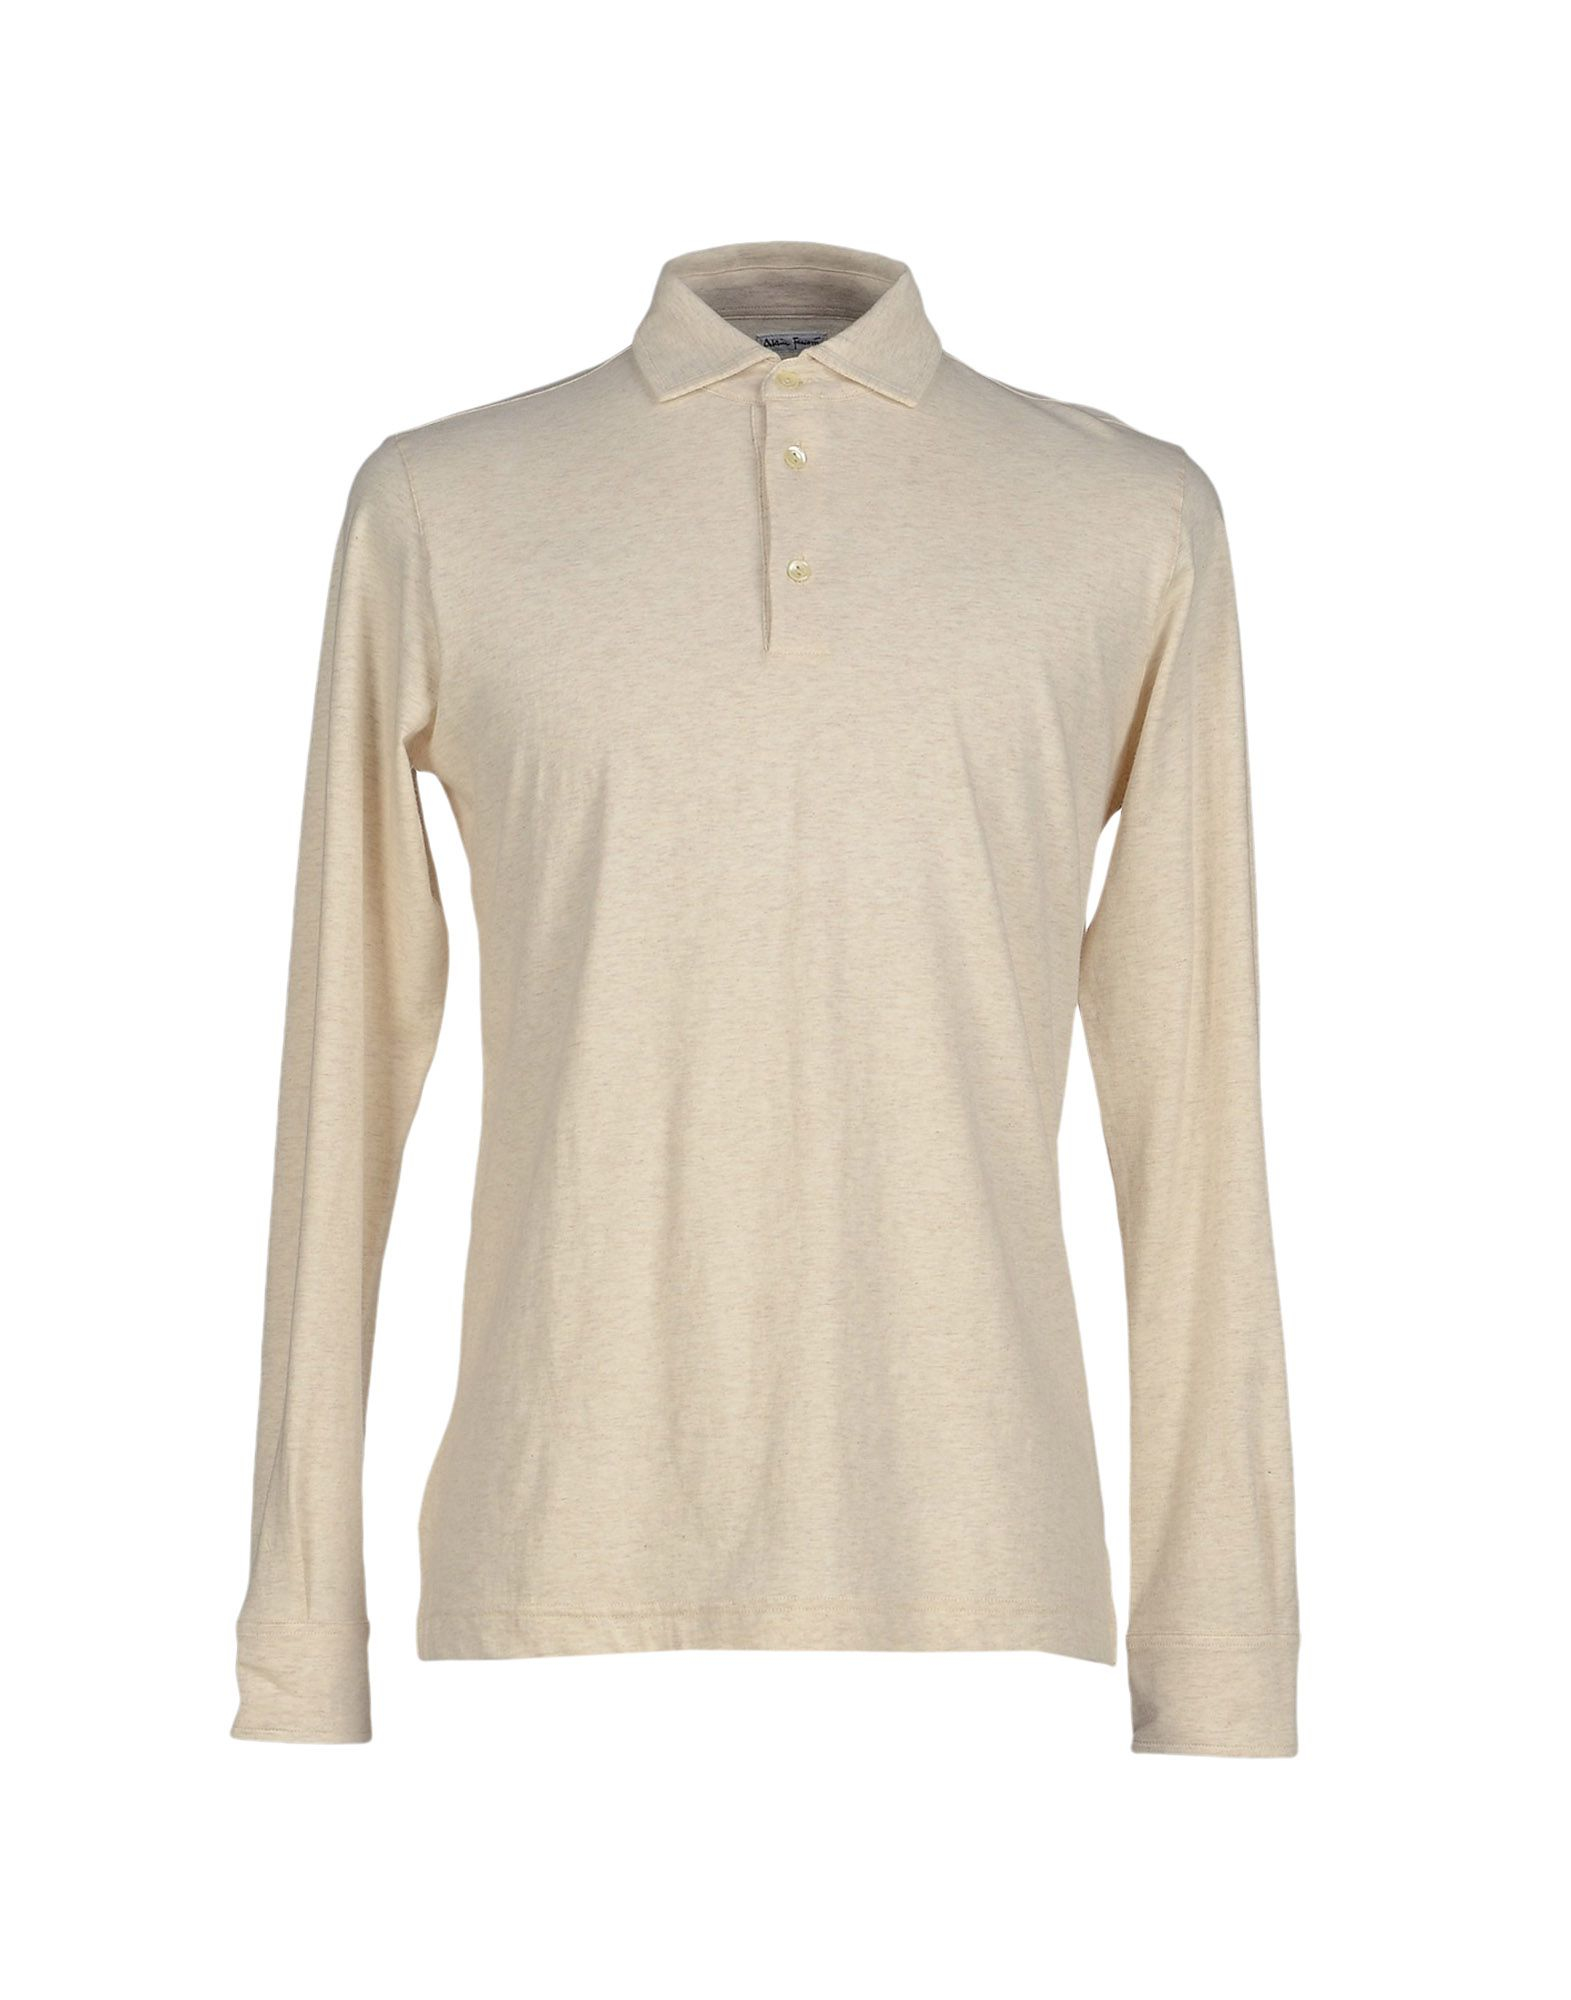 Alain Polo Shirt in Beige for Men (Ivory) - Save 52% | Lyst